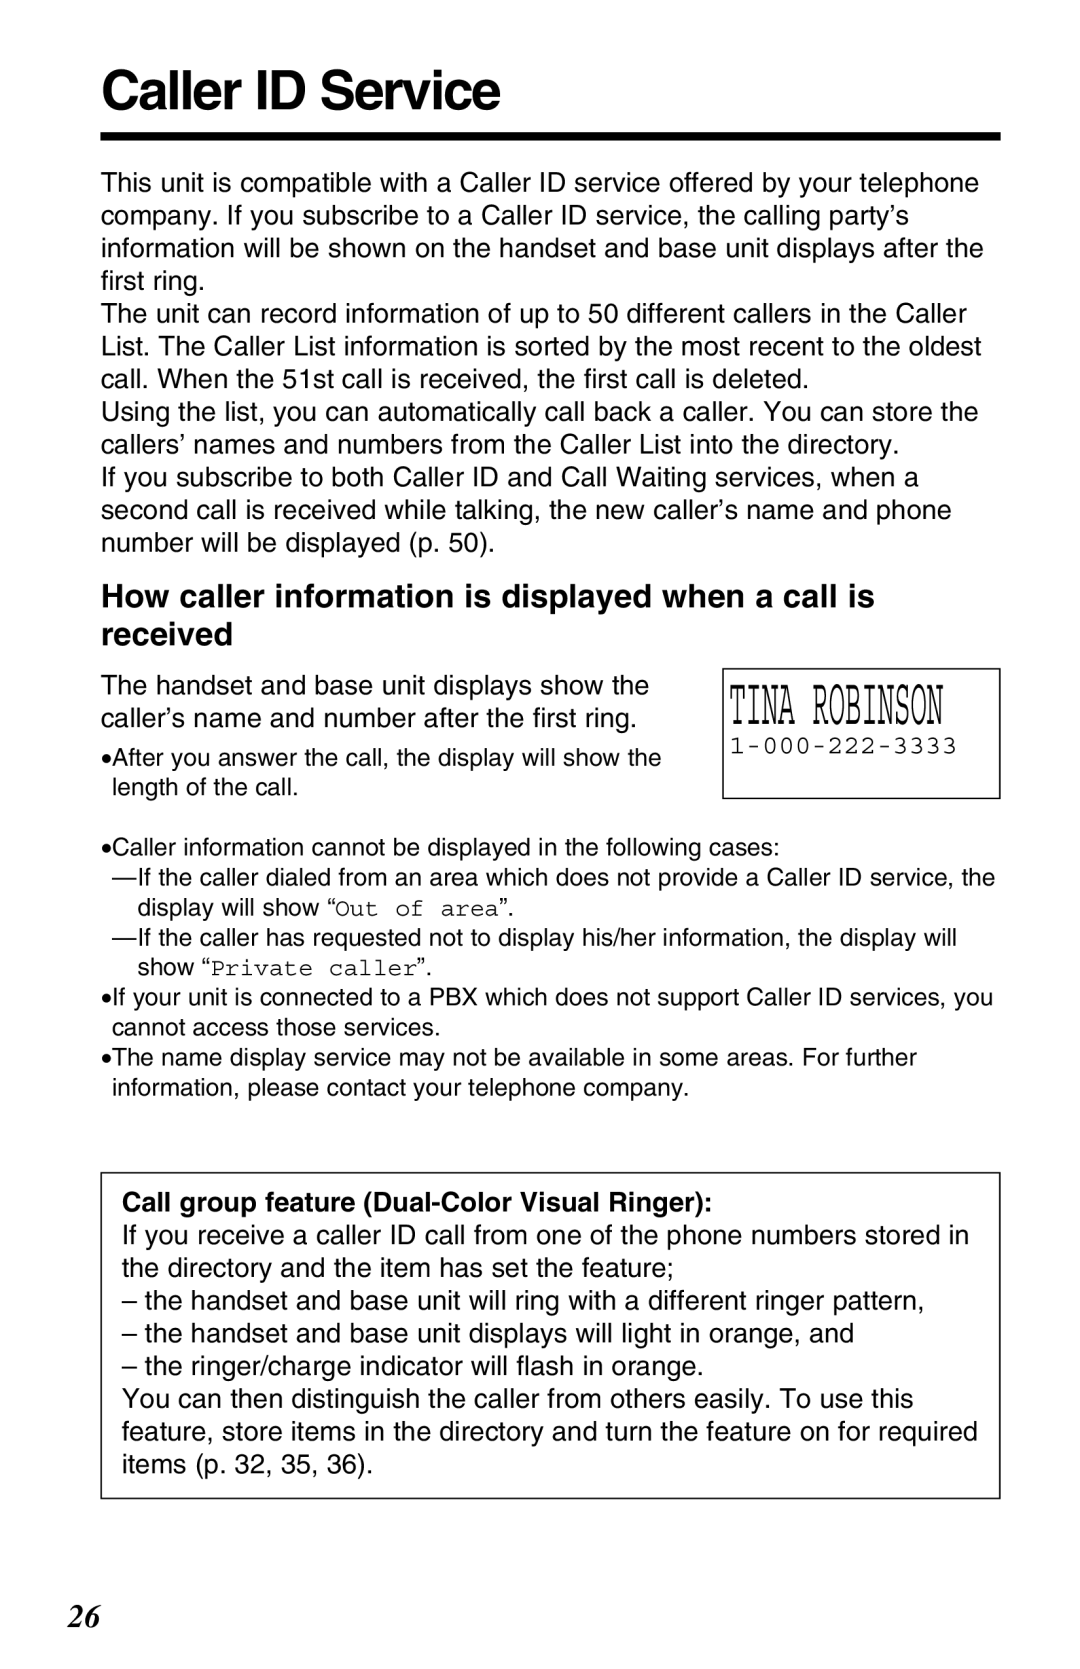 Panasonic KX-TG2650N operating instructions Caller ID Service, How caller information is displayed when a call is received 